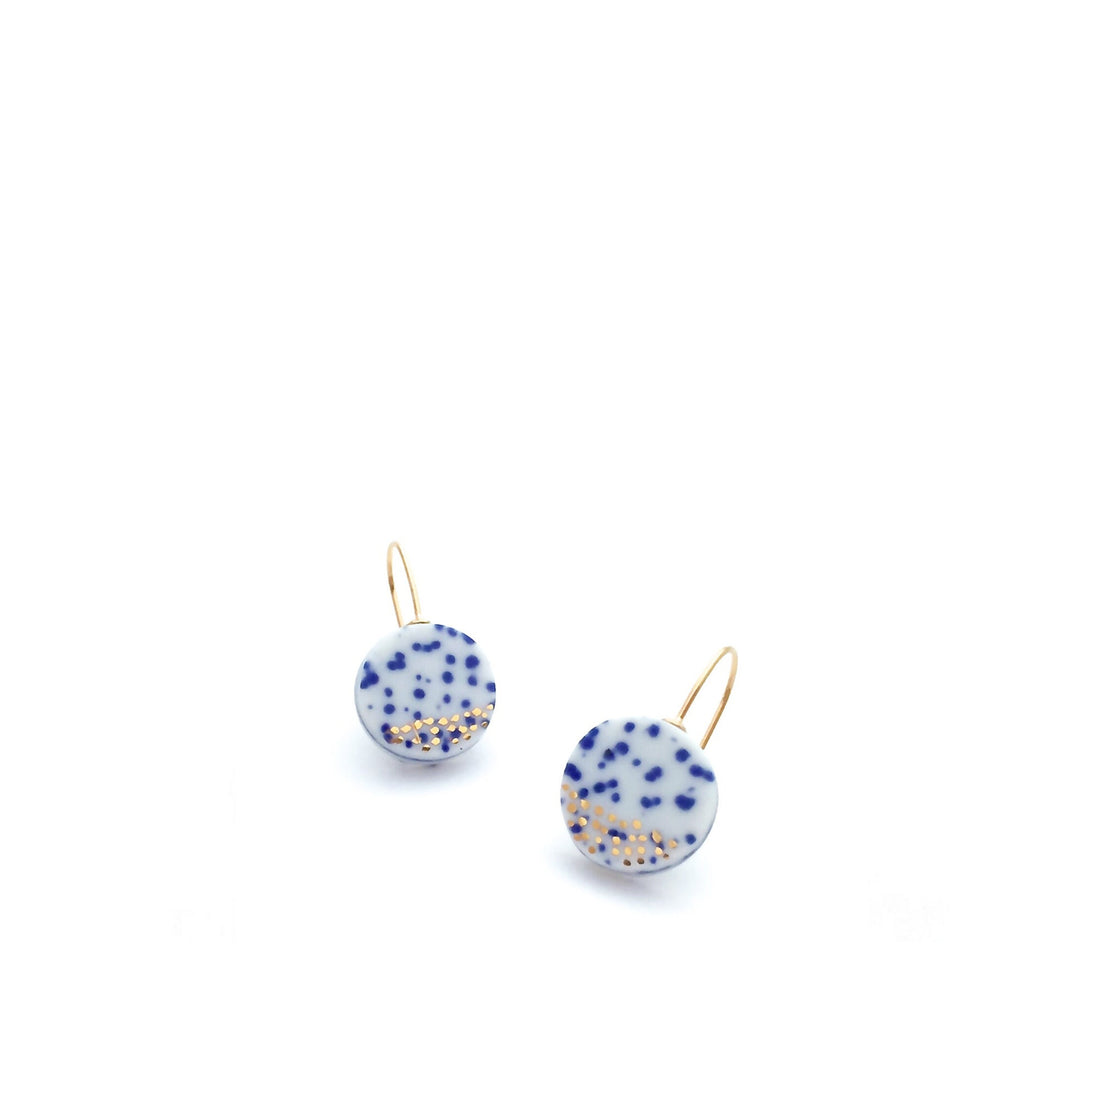 Starry Night Ceramic jewelry set in blue and white porcelain with gold